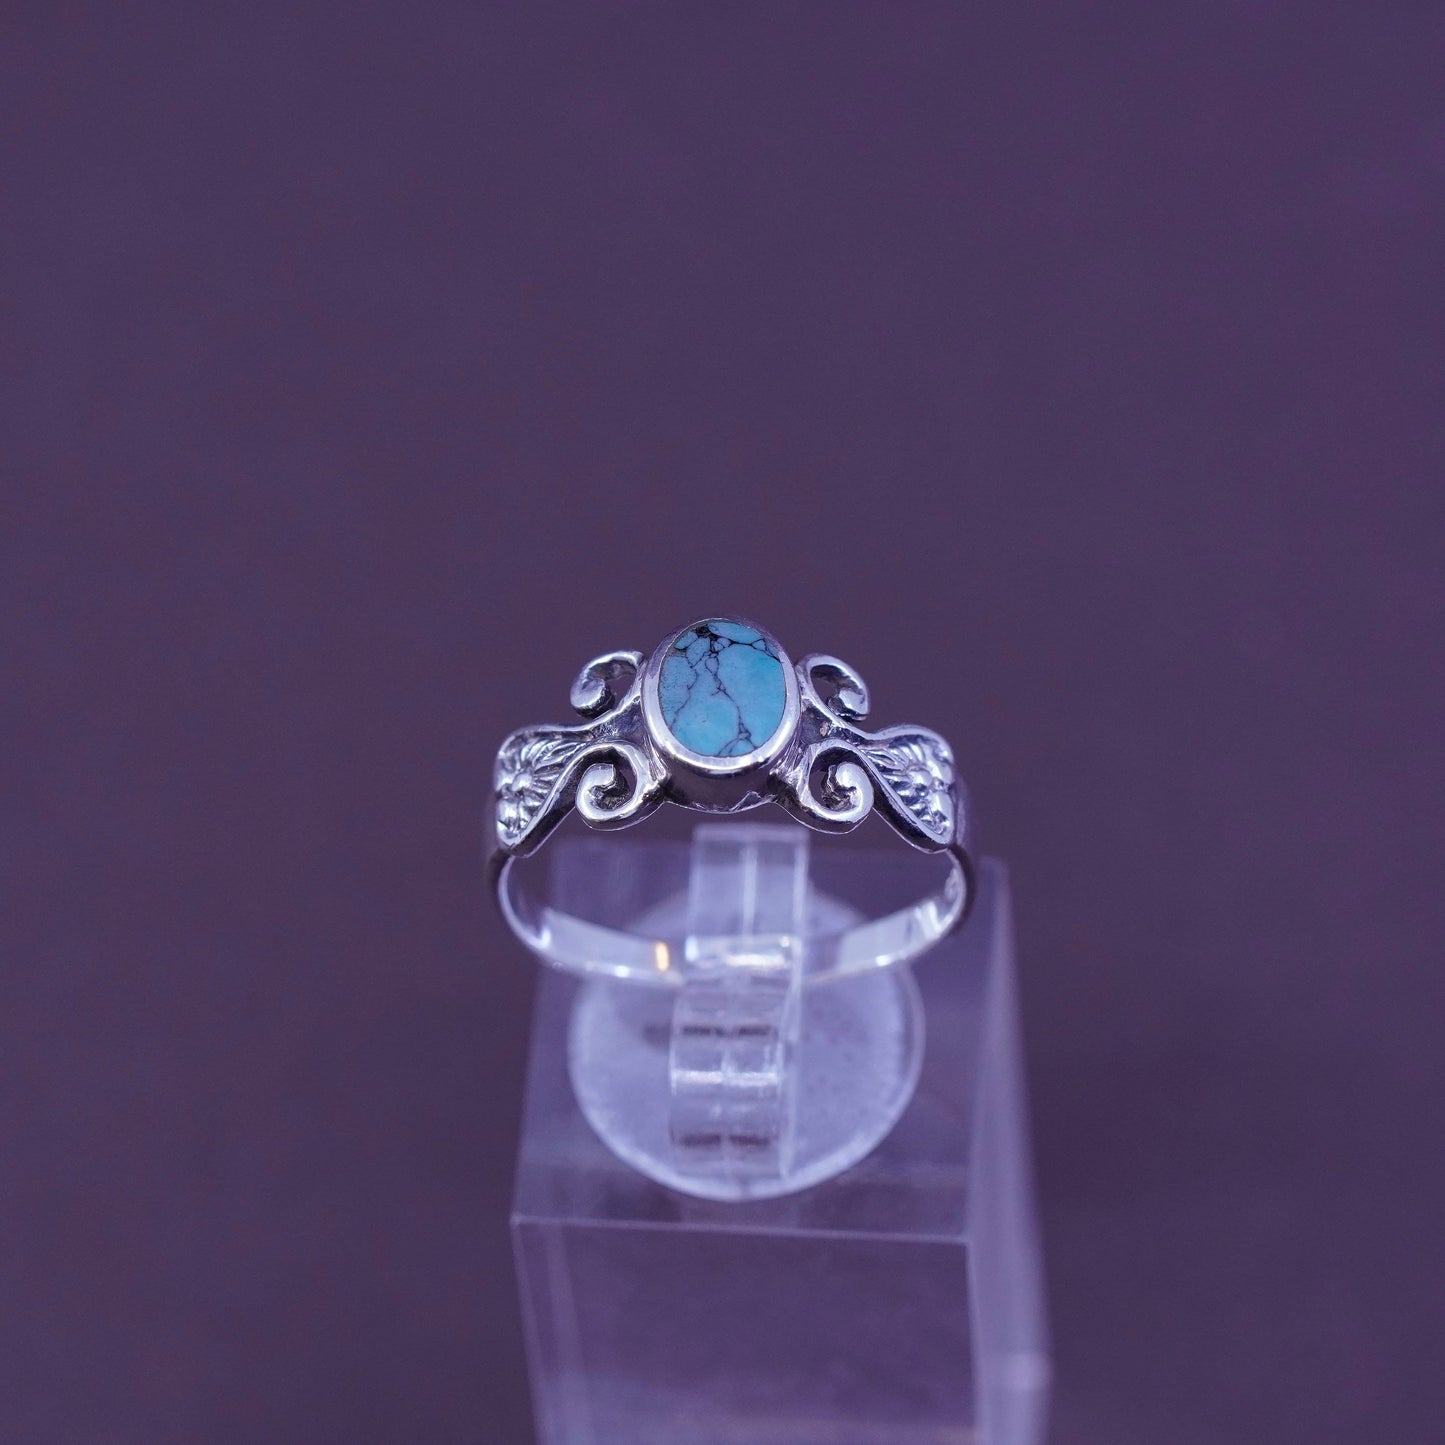 Size 8.5, vintage Sterling 925 silver handmade ring with turquoise and filigree